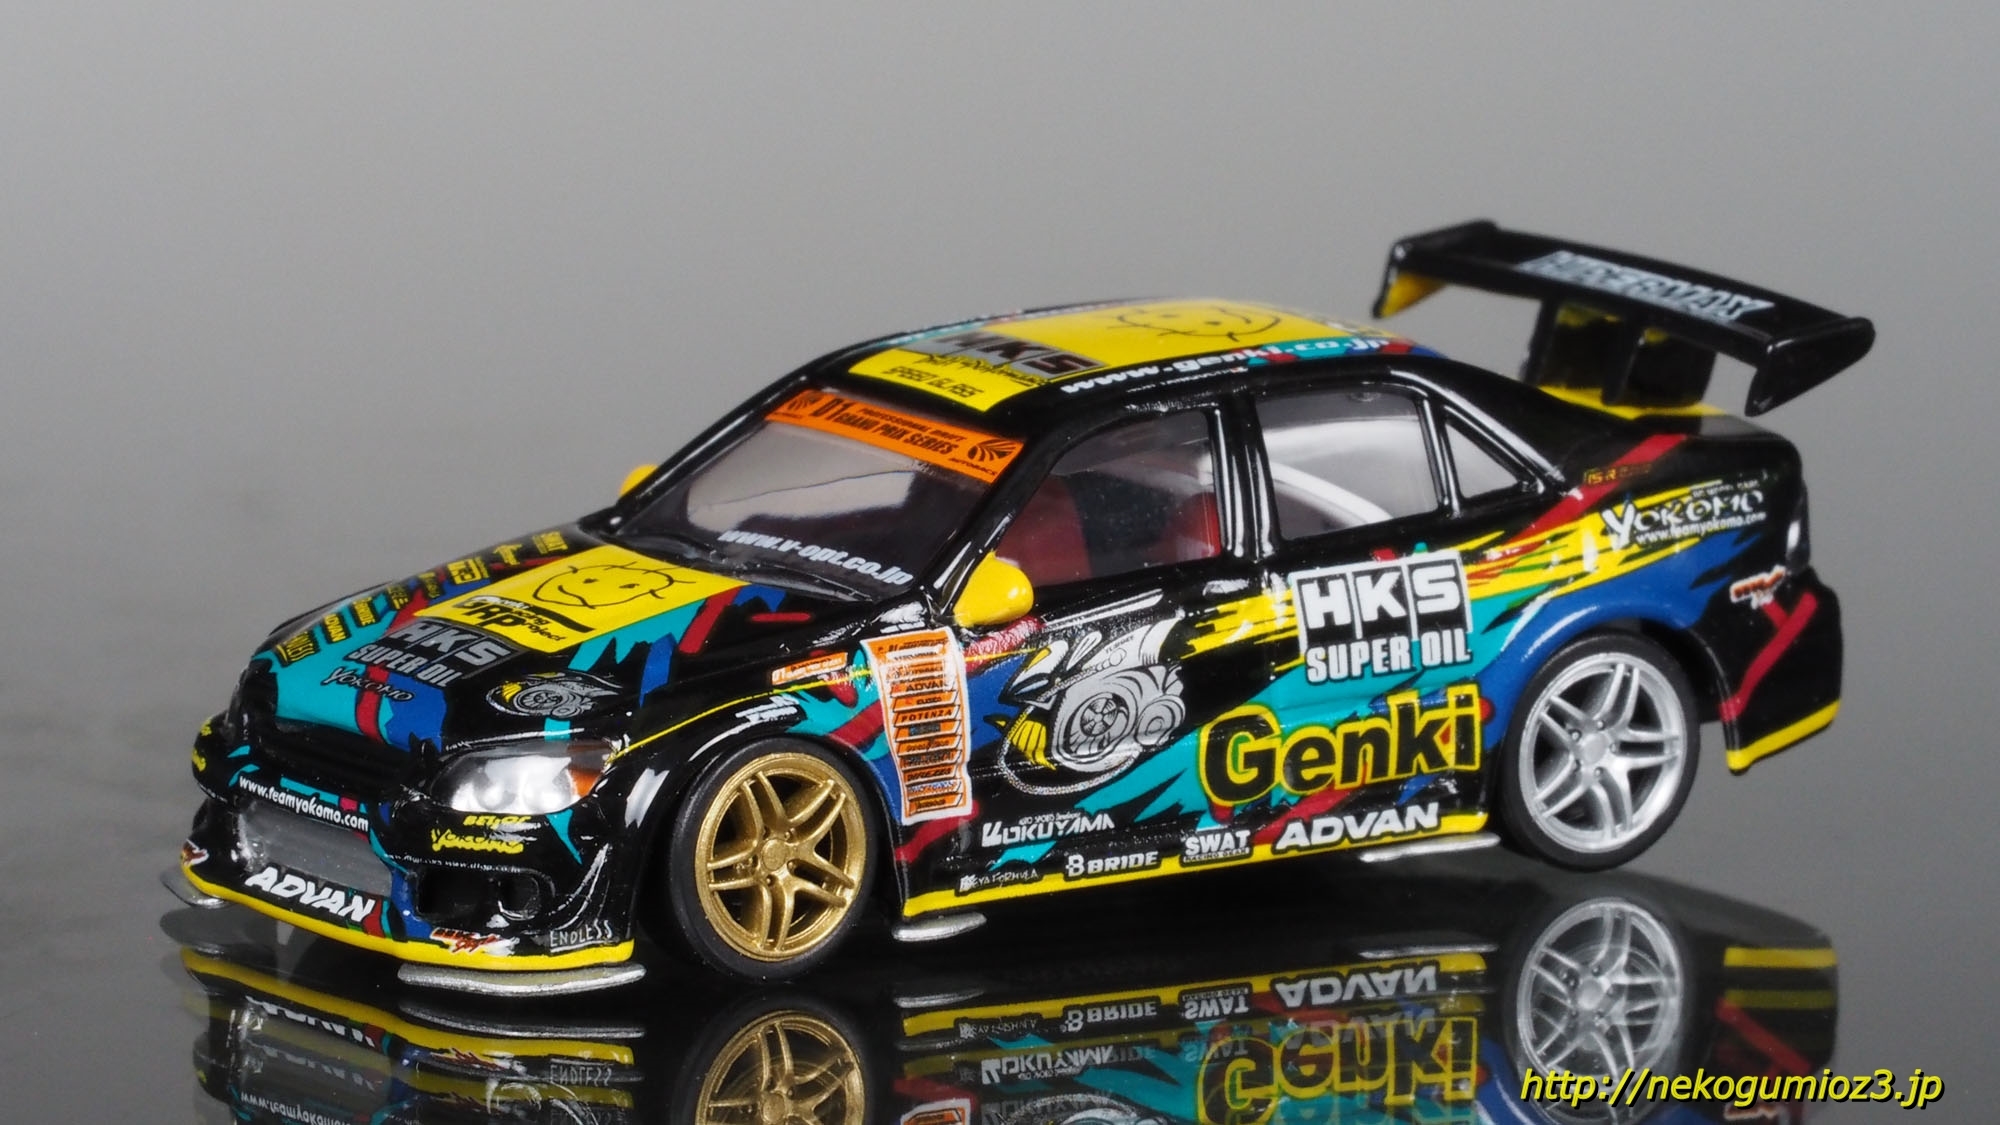 1/64 HKS GENKIレーシング パフォーマー IS-220-R ALTEZZA 2004 (谷口 